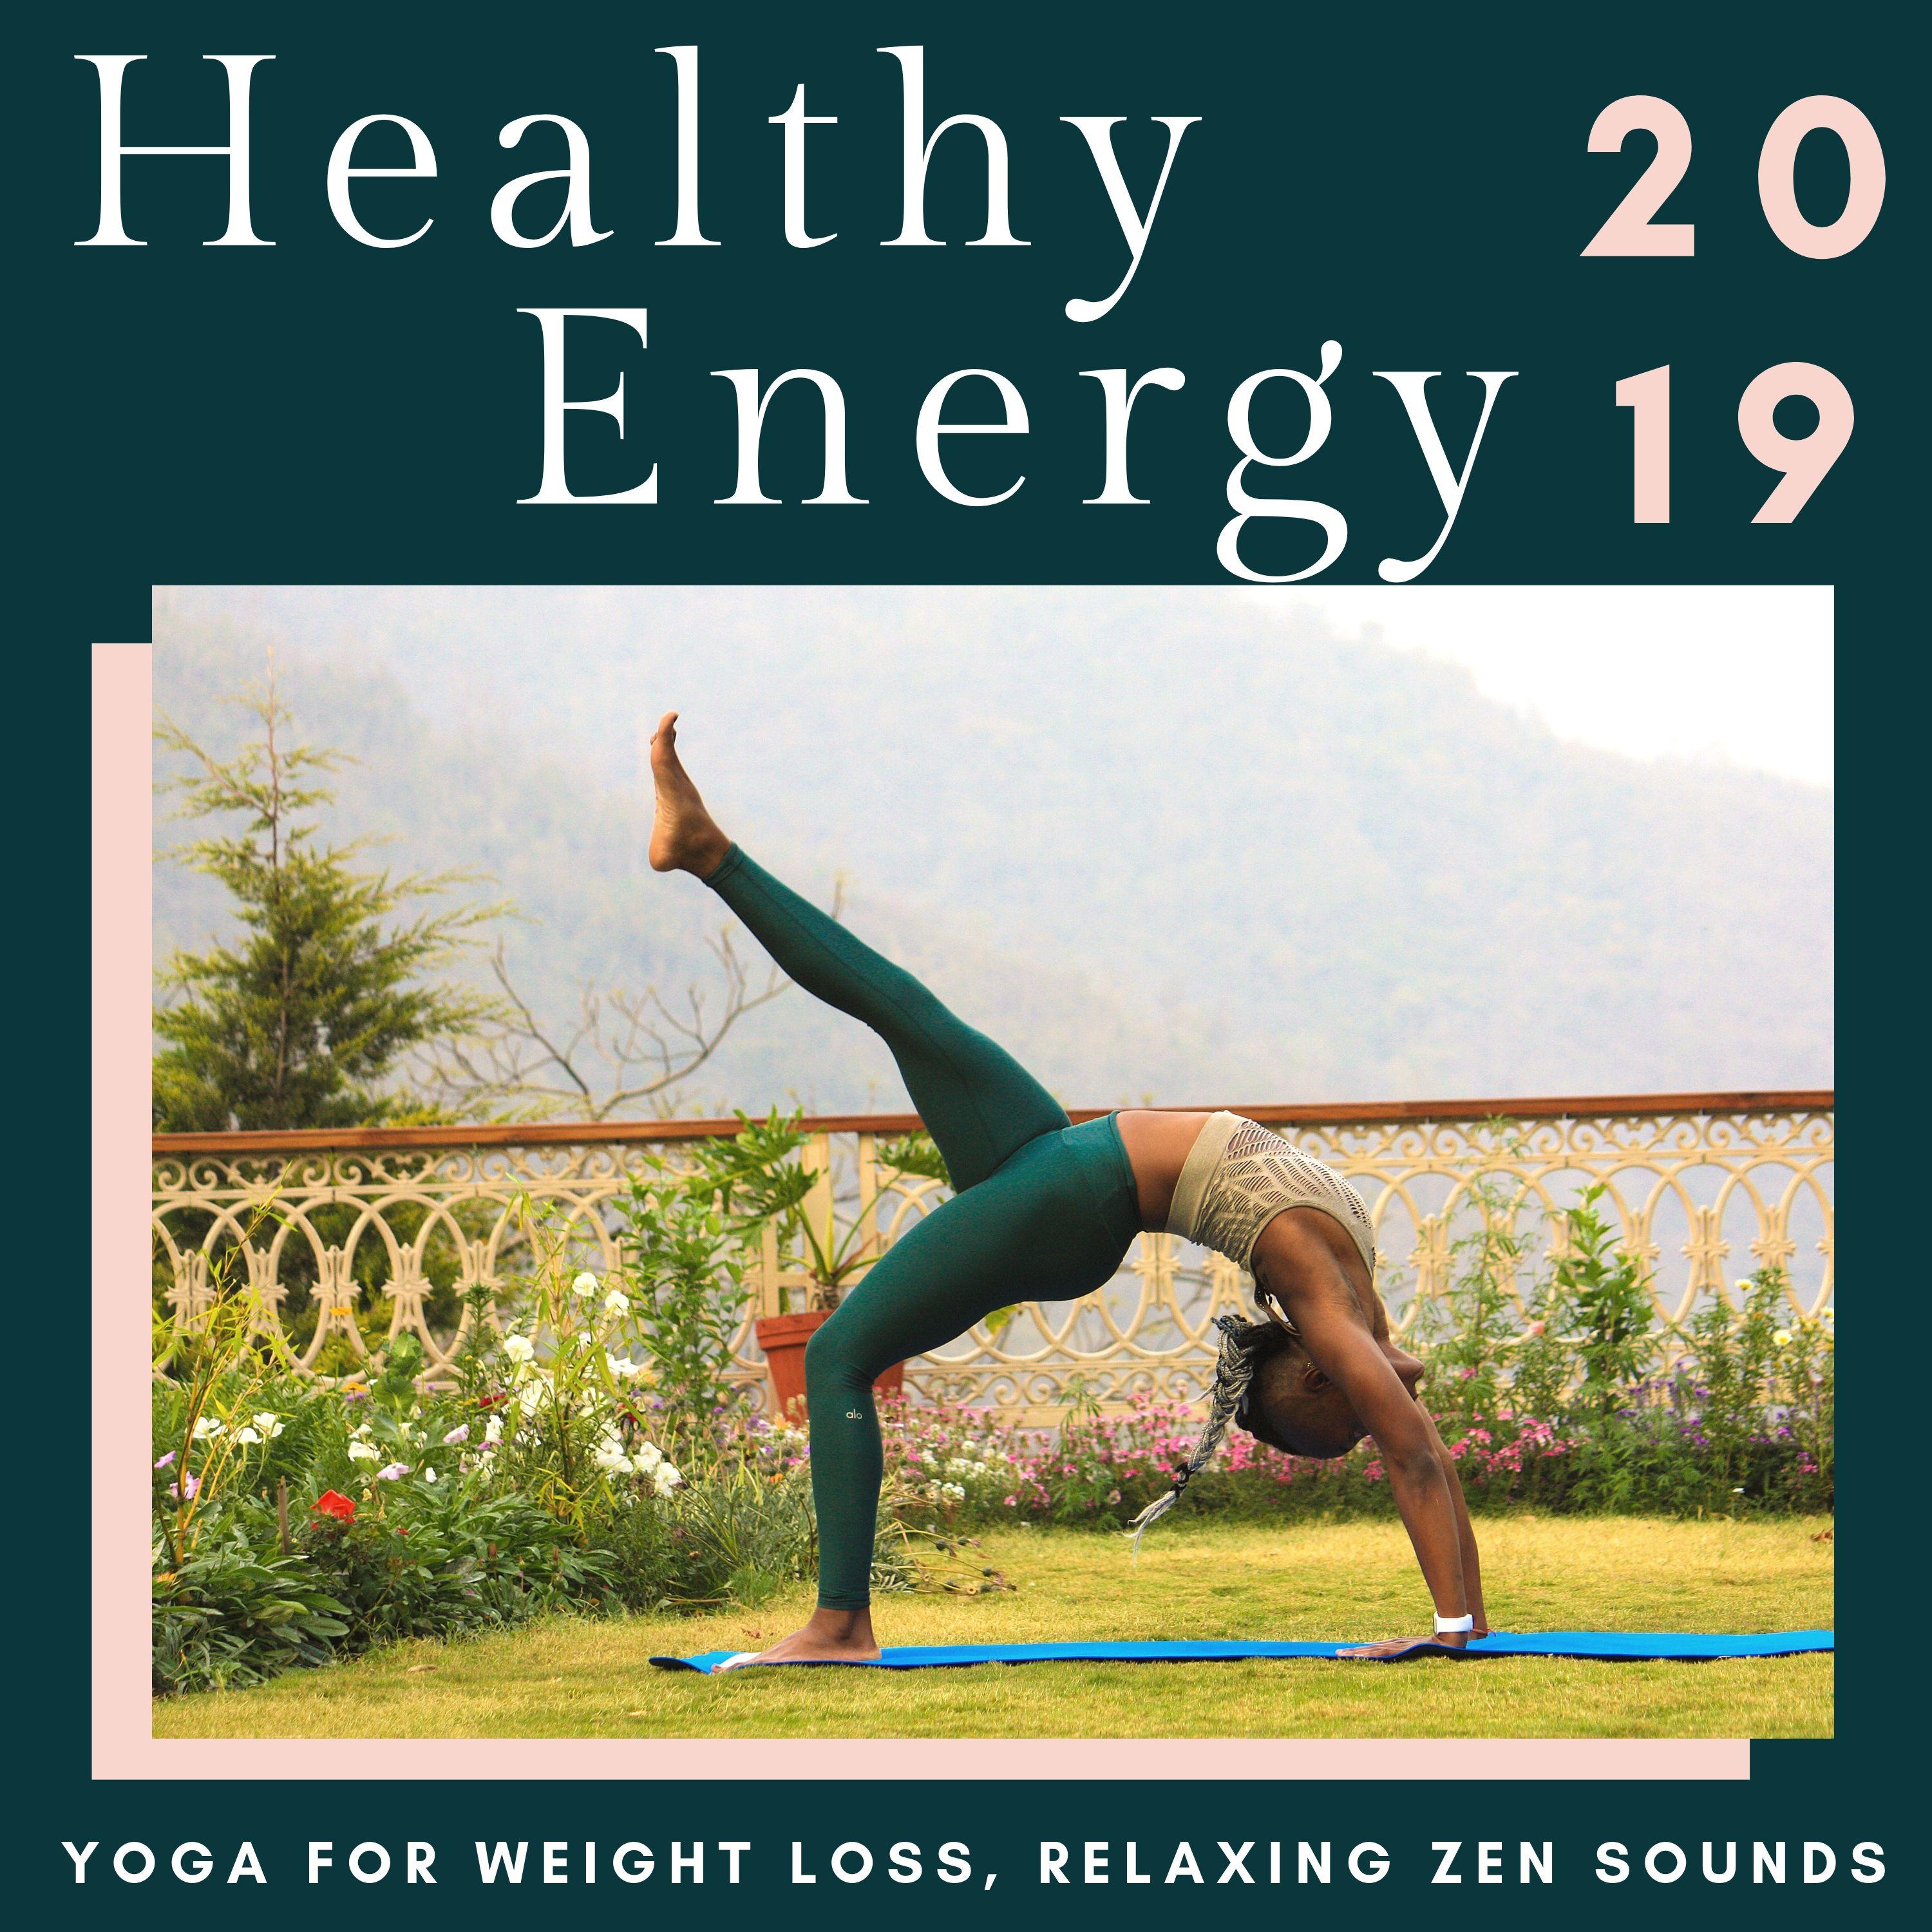 Healthy Energy 2019 - Yoga for Weight Loss, Relaxing Zen Sounds